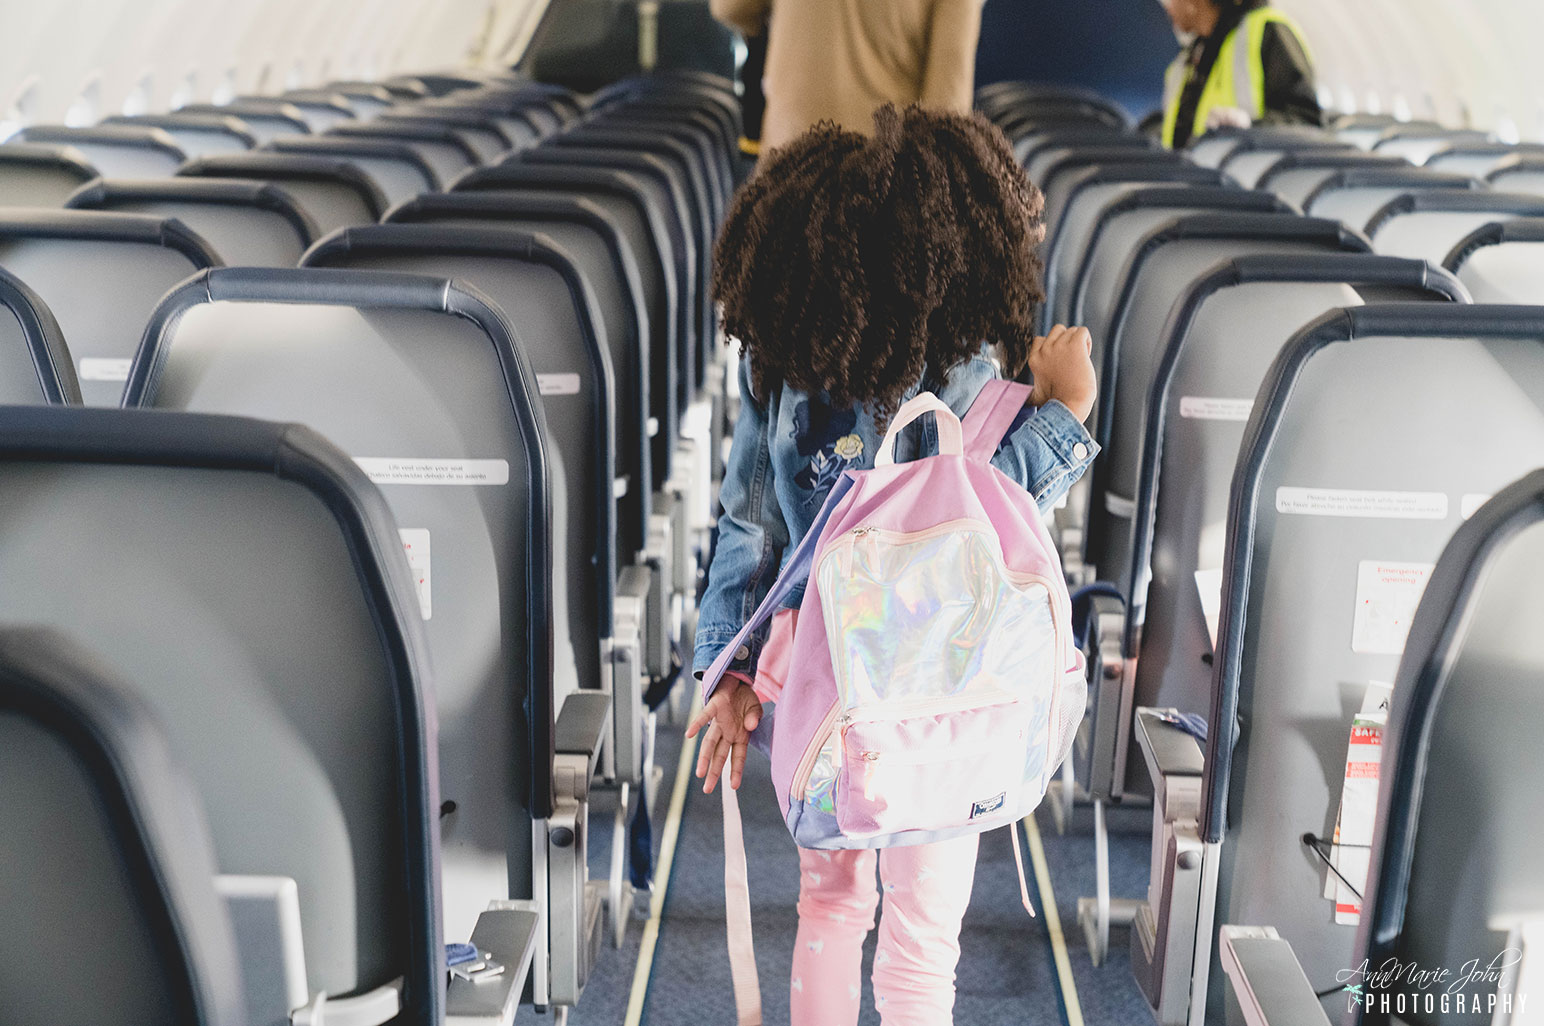 Tips For Traveling With Kids